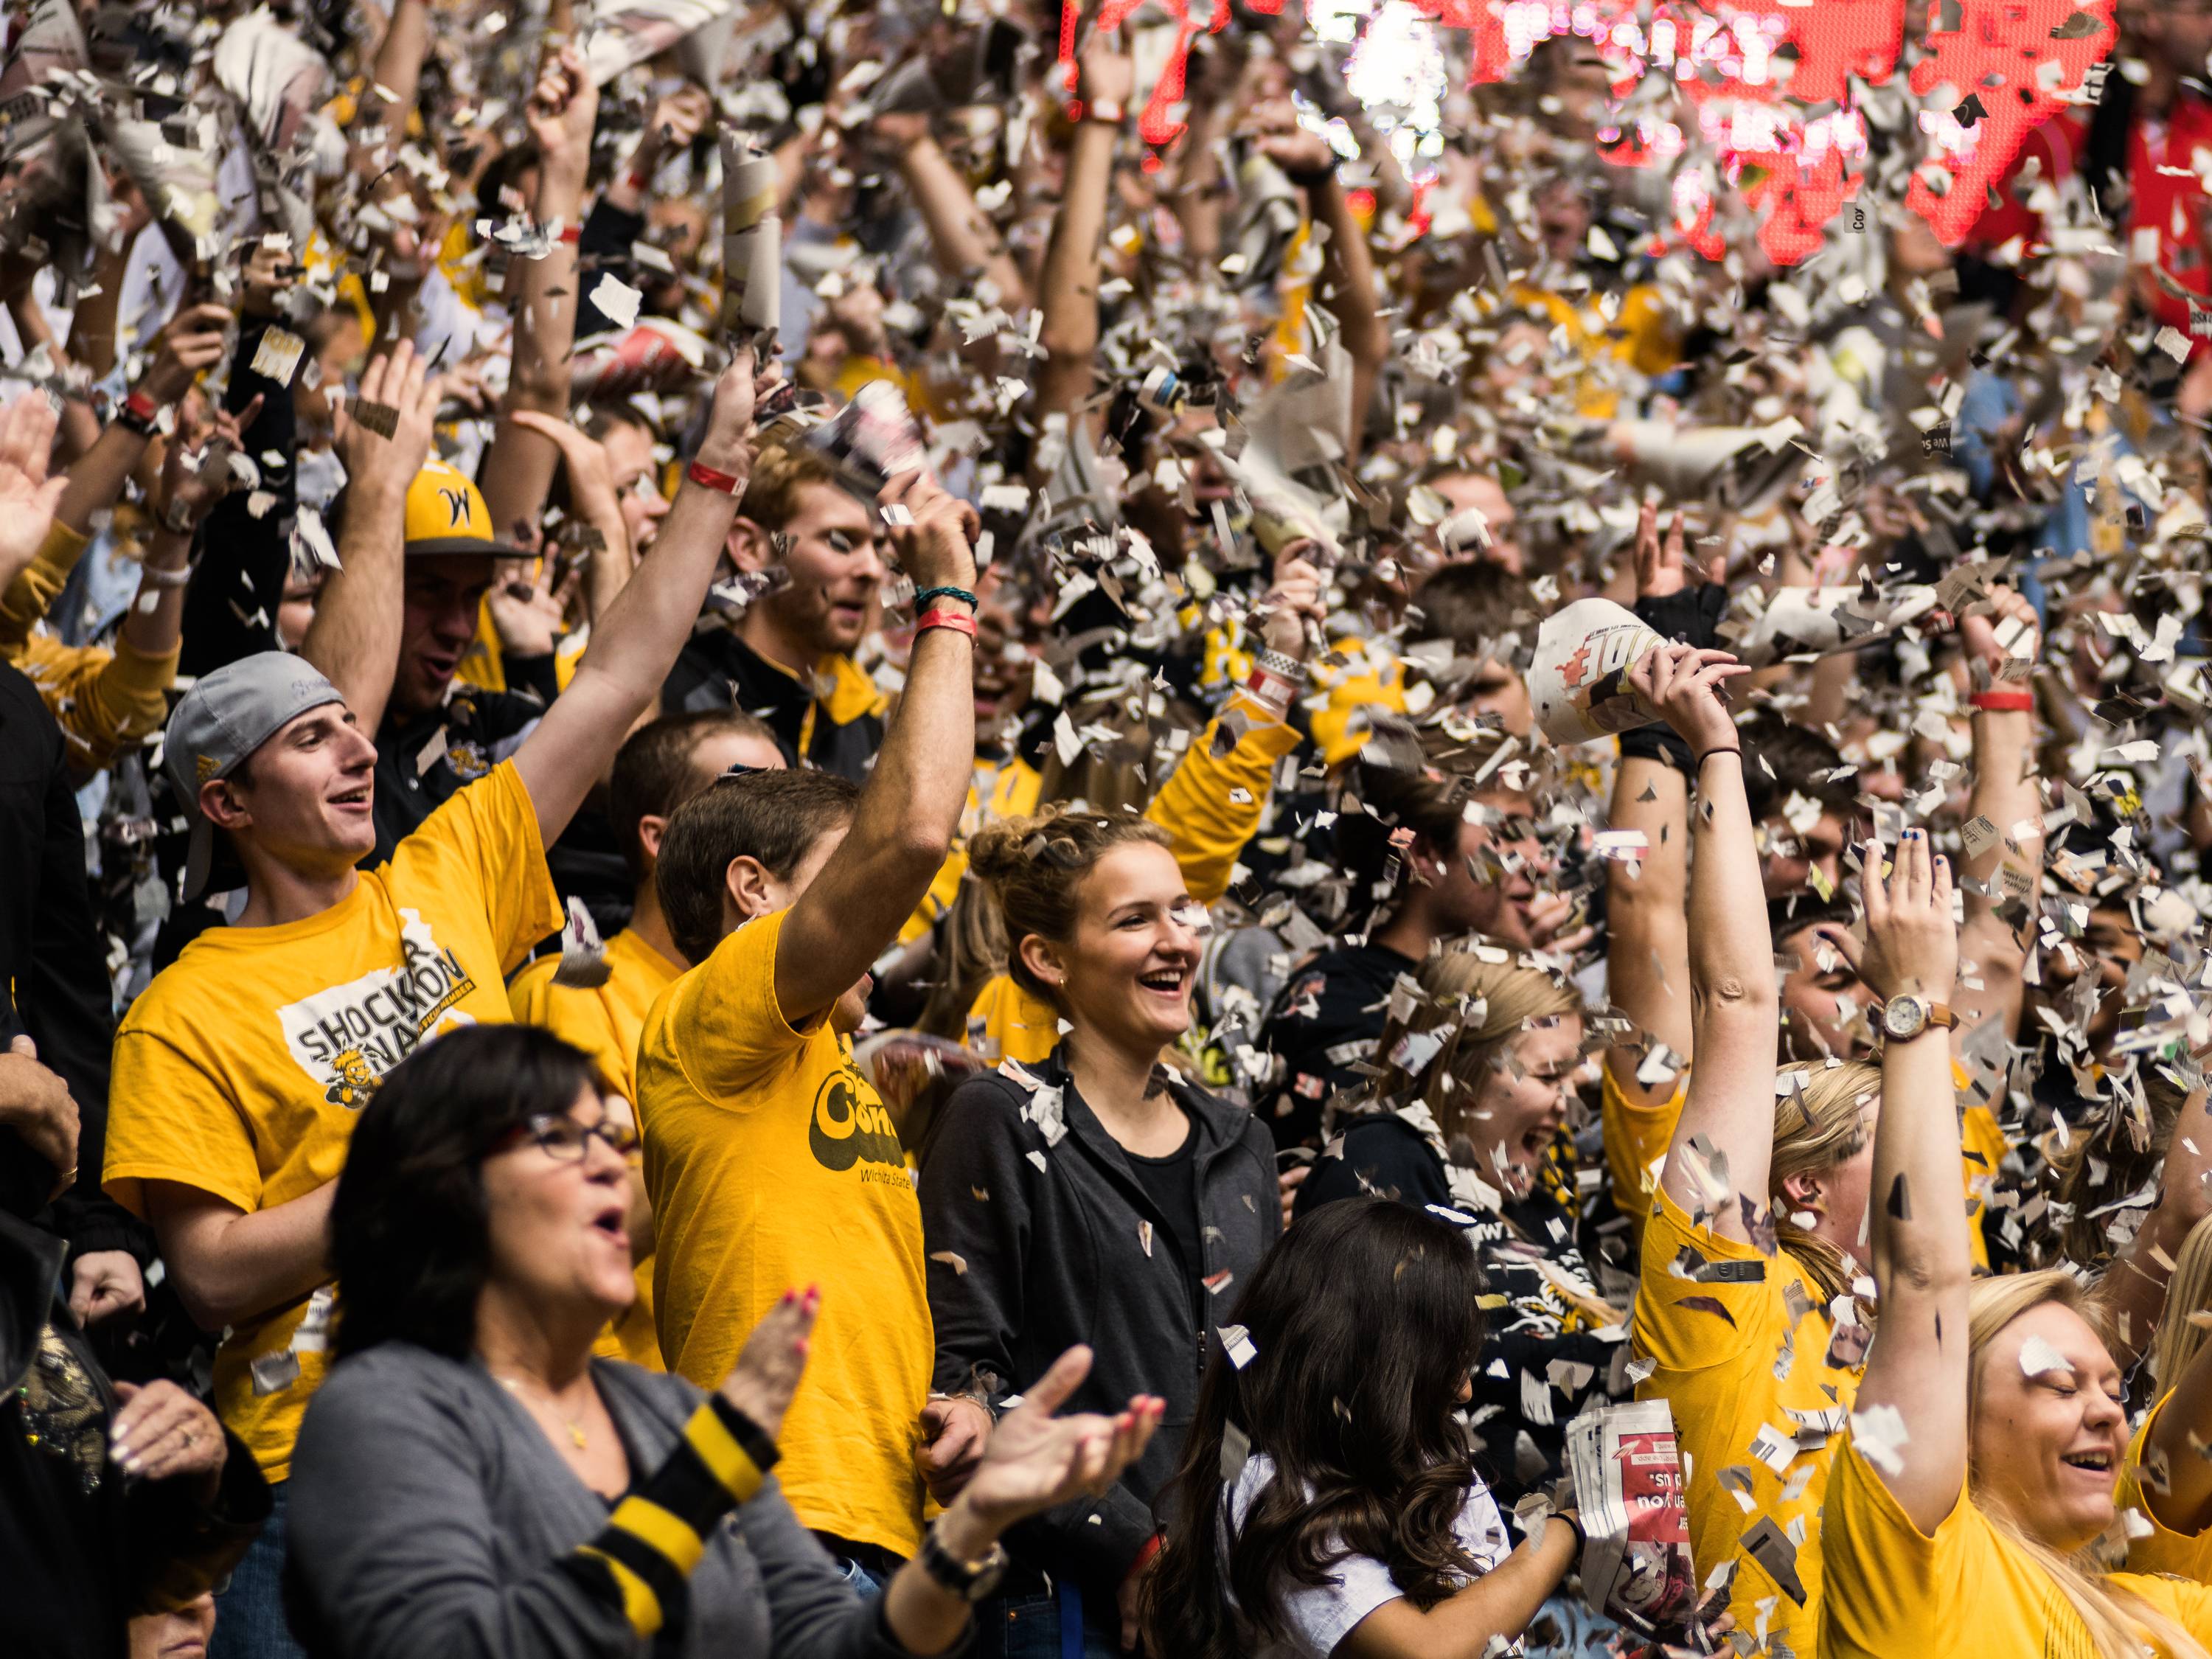 Students celebrate a Shocker basketball win with confetti at Charles Koch Arena